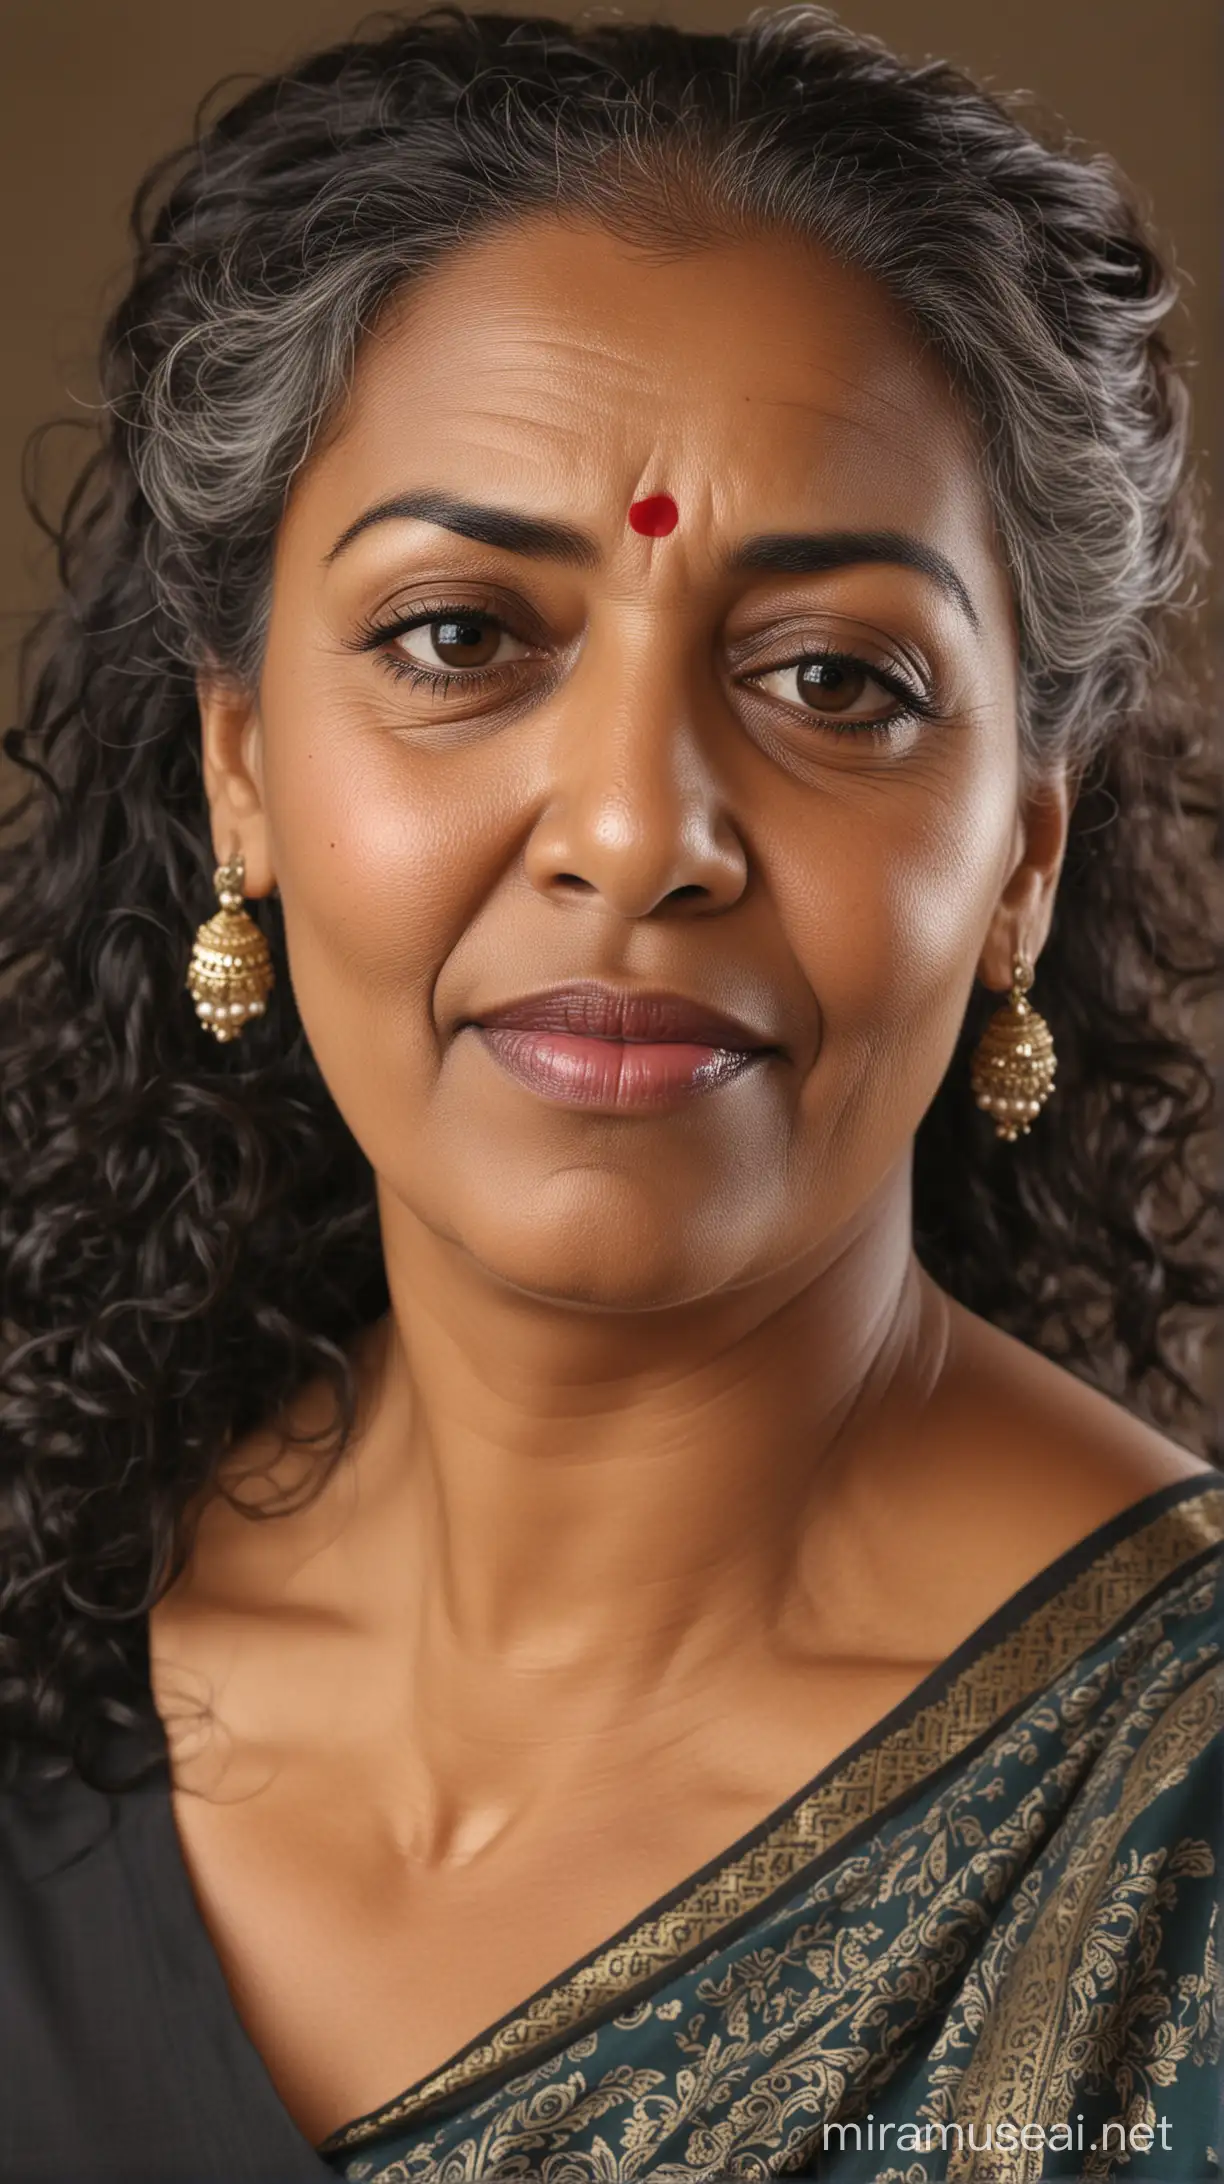 A 72 year old black fat woman with small eyes, small nose, weak chin, wide lips and long curly hair with a bun at back wearing a saree 